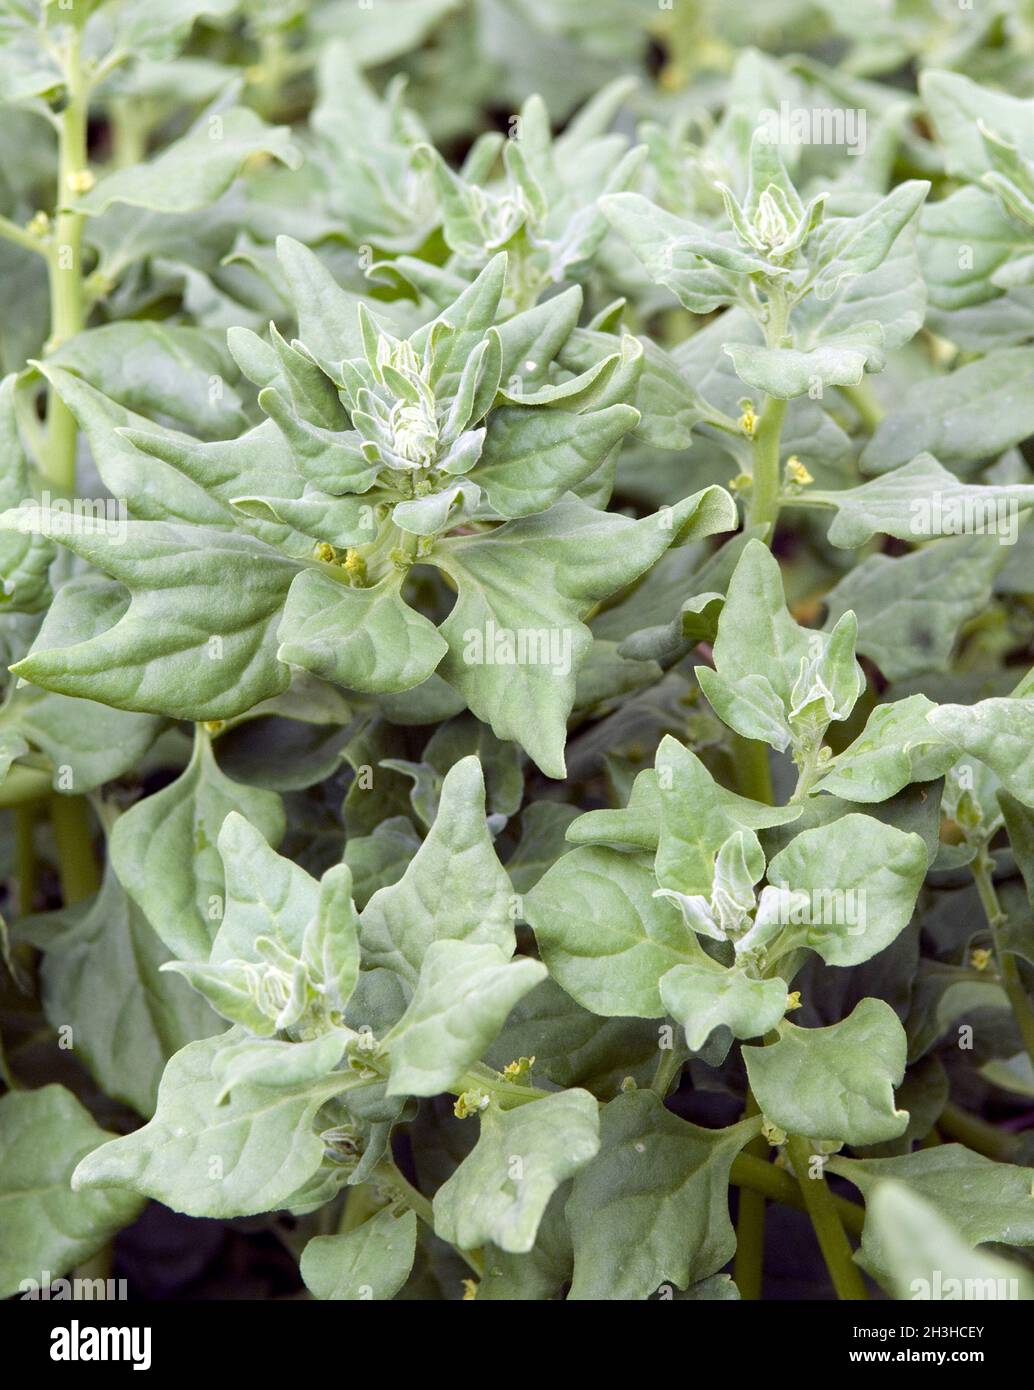 New Zealand spinach Stock Photo